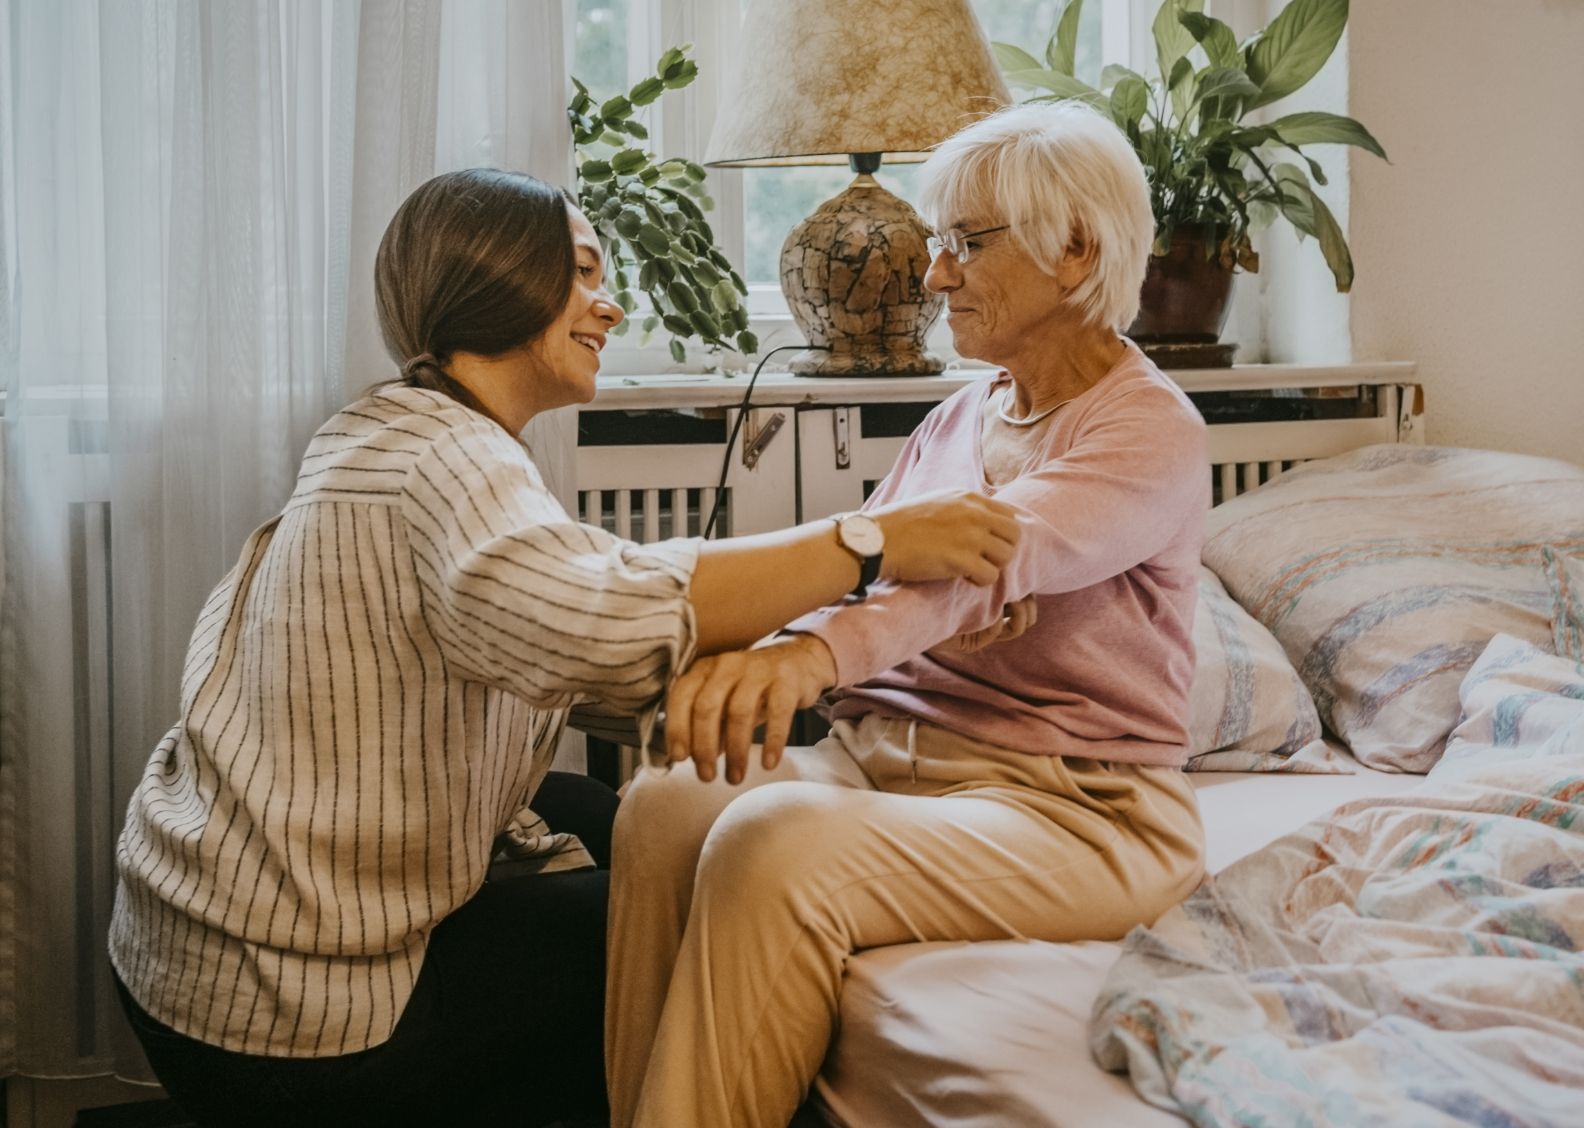 Physical Therapist adjusts arm of an older adult client.